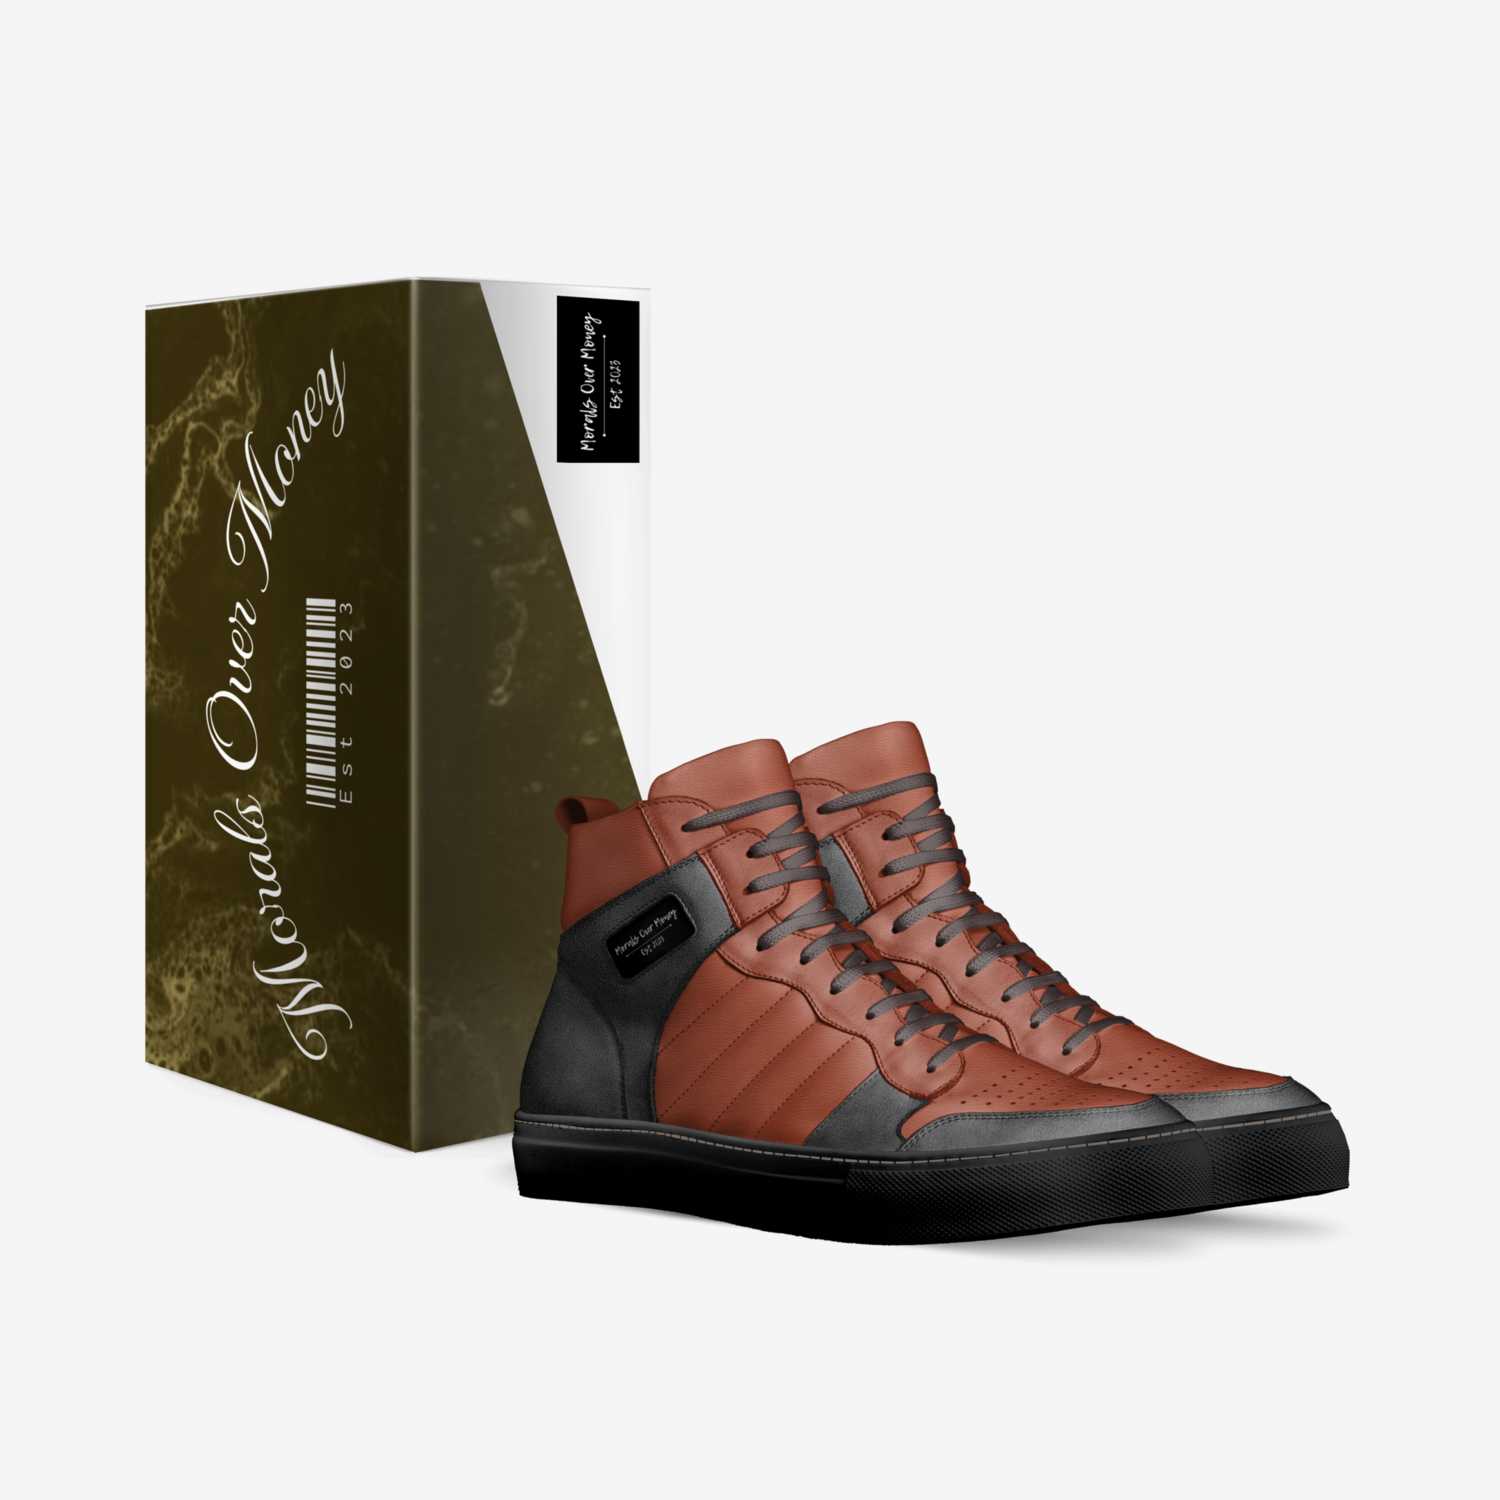 Morals Over Money custom made in Italy shoes by Matthew Demerchant | Box view